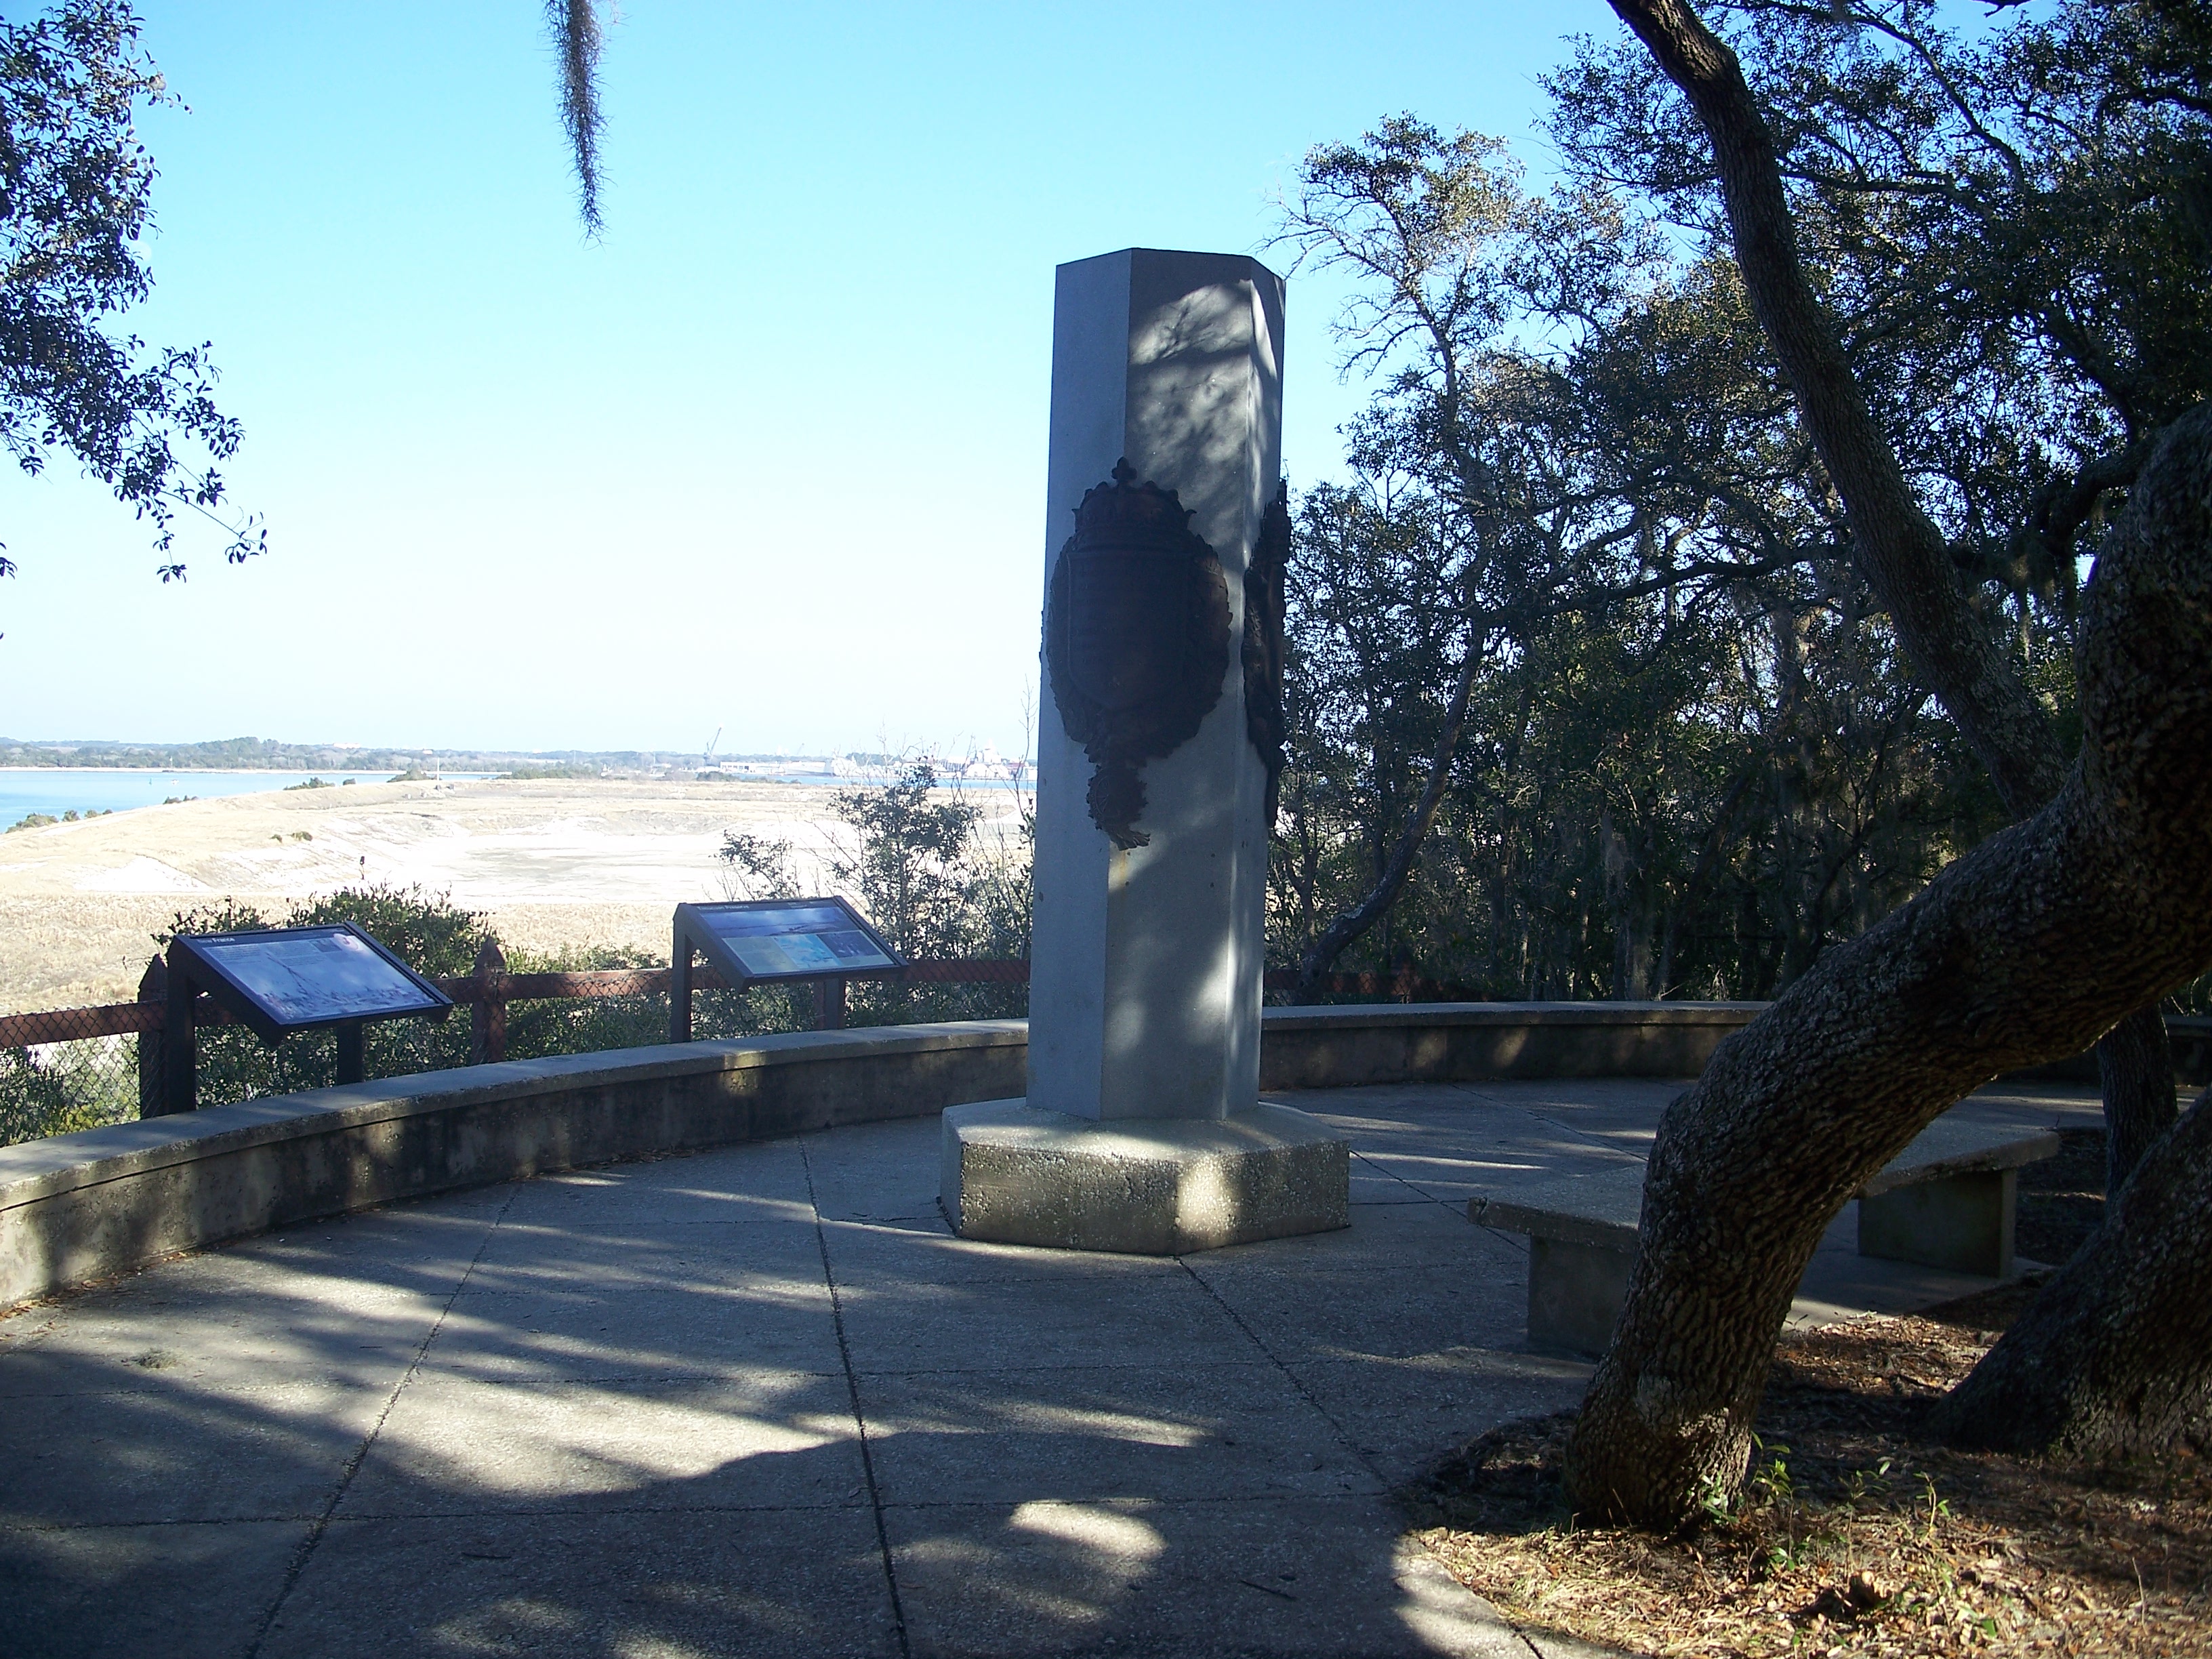 The Ribault Monument at the Timucuan Ecological and Historical Reserve. Image by Ebyabe - Own work, CC BY-SA 3.0, https://commons.wikimedia.org/w/index.php?curid=12779395